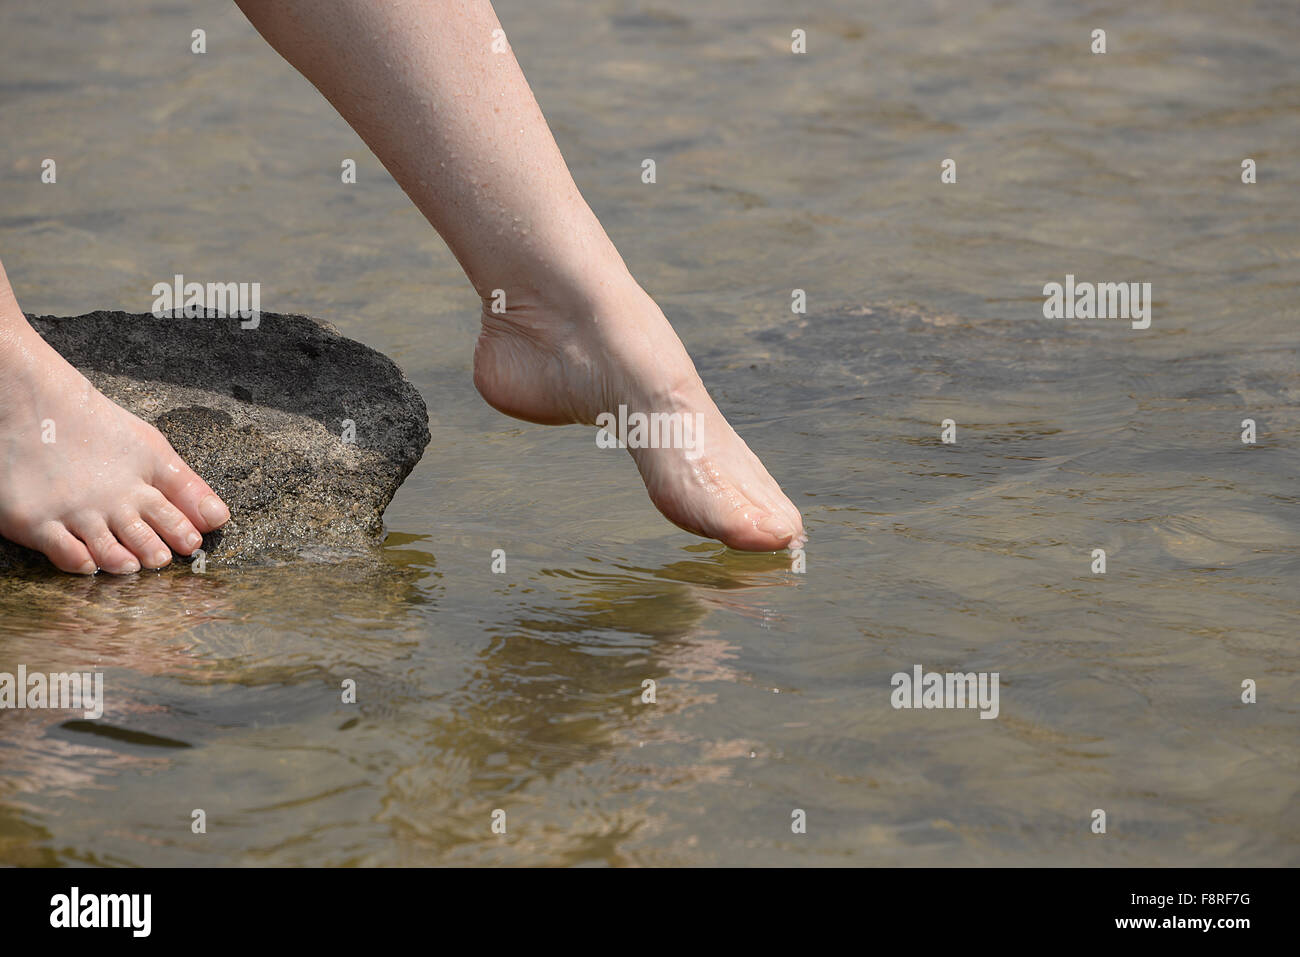 https://c8.alamy.com/comp/F8RF7G/woman-dipping-her-toes-in-the-sea-F8RF7G.jpg